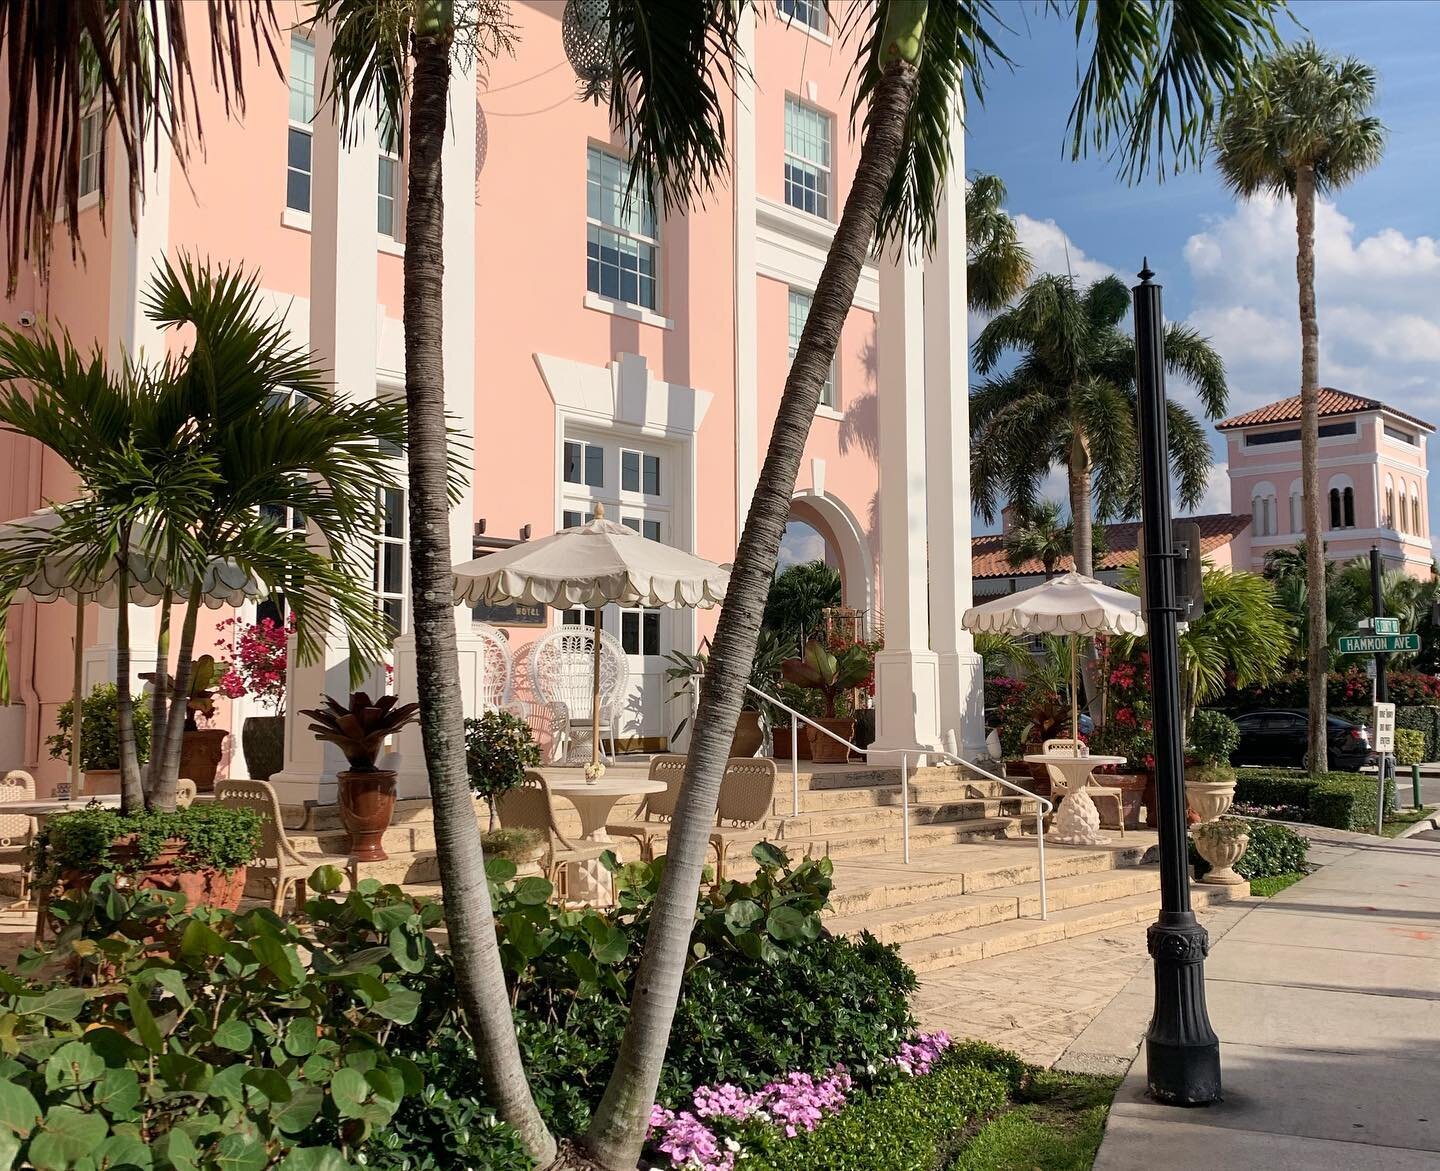 I&rsquo;ve read all the buzz about this Palm Beach icon in magazines and online so Olivia and I had to check it out. It did not disappoint! 😍 The Colony Hotel has both an awe-inspiring and welcoming sort of charm. Nothing like travel and beautiful d